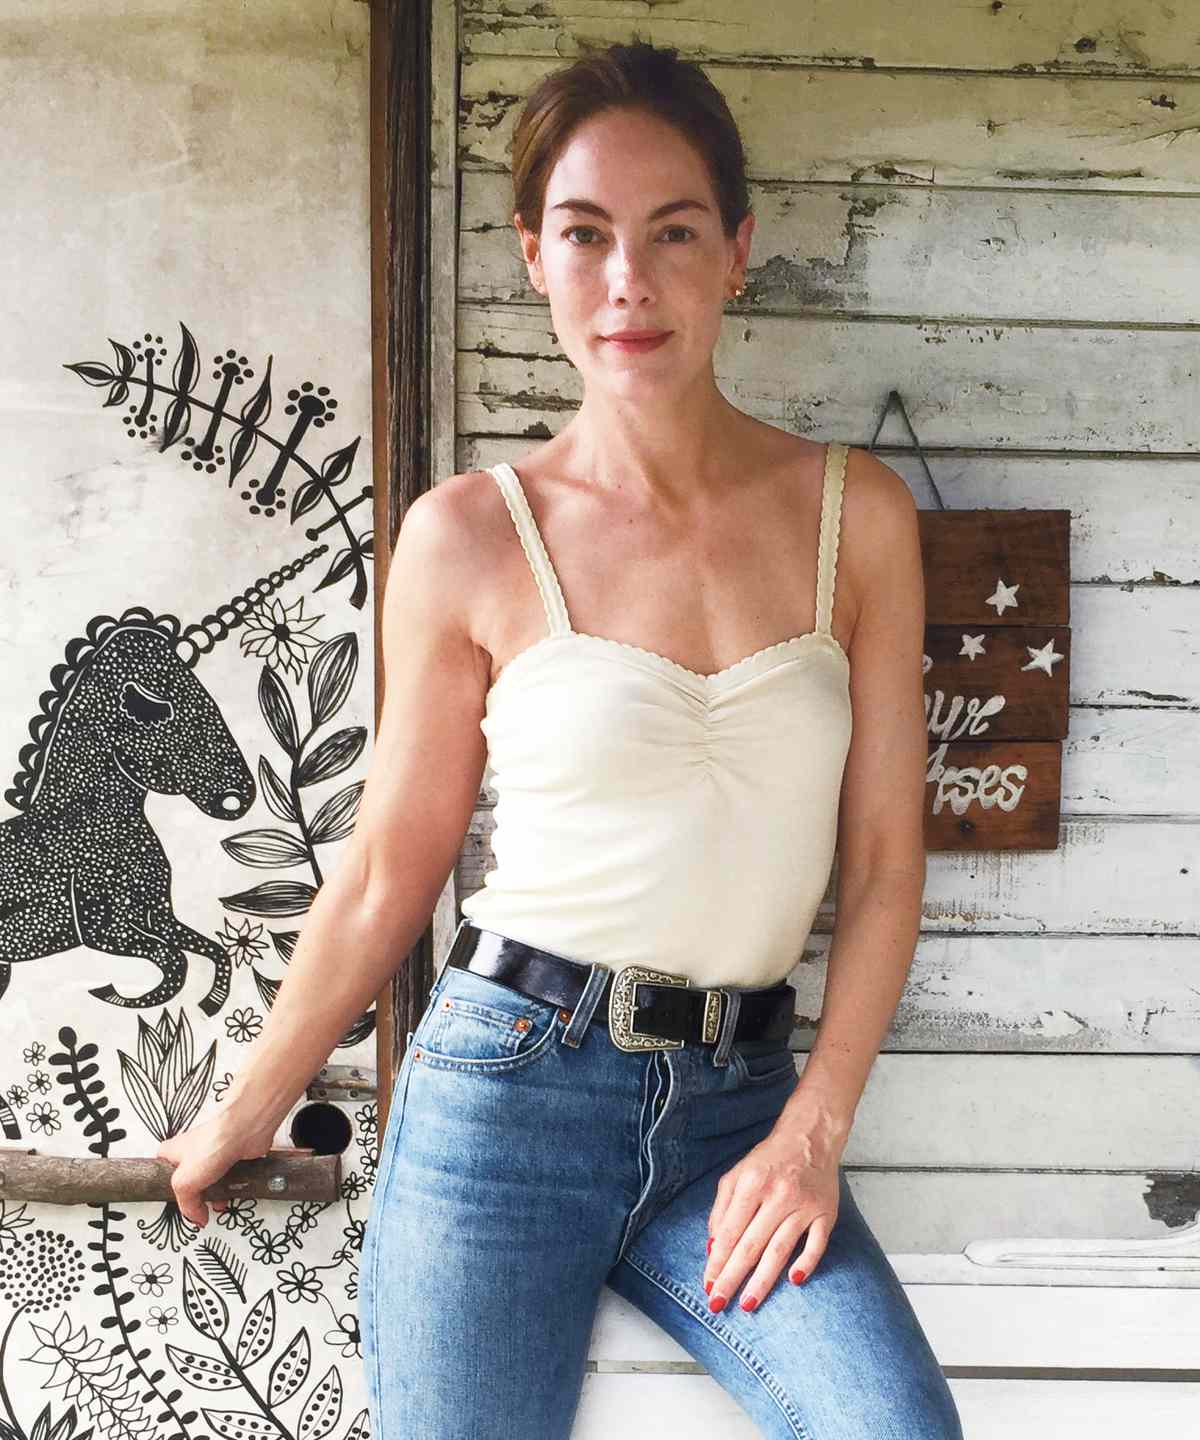 Monaghan nsfw michelle Michelle Monaghan,